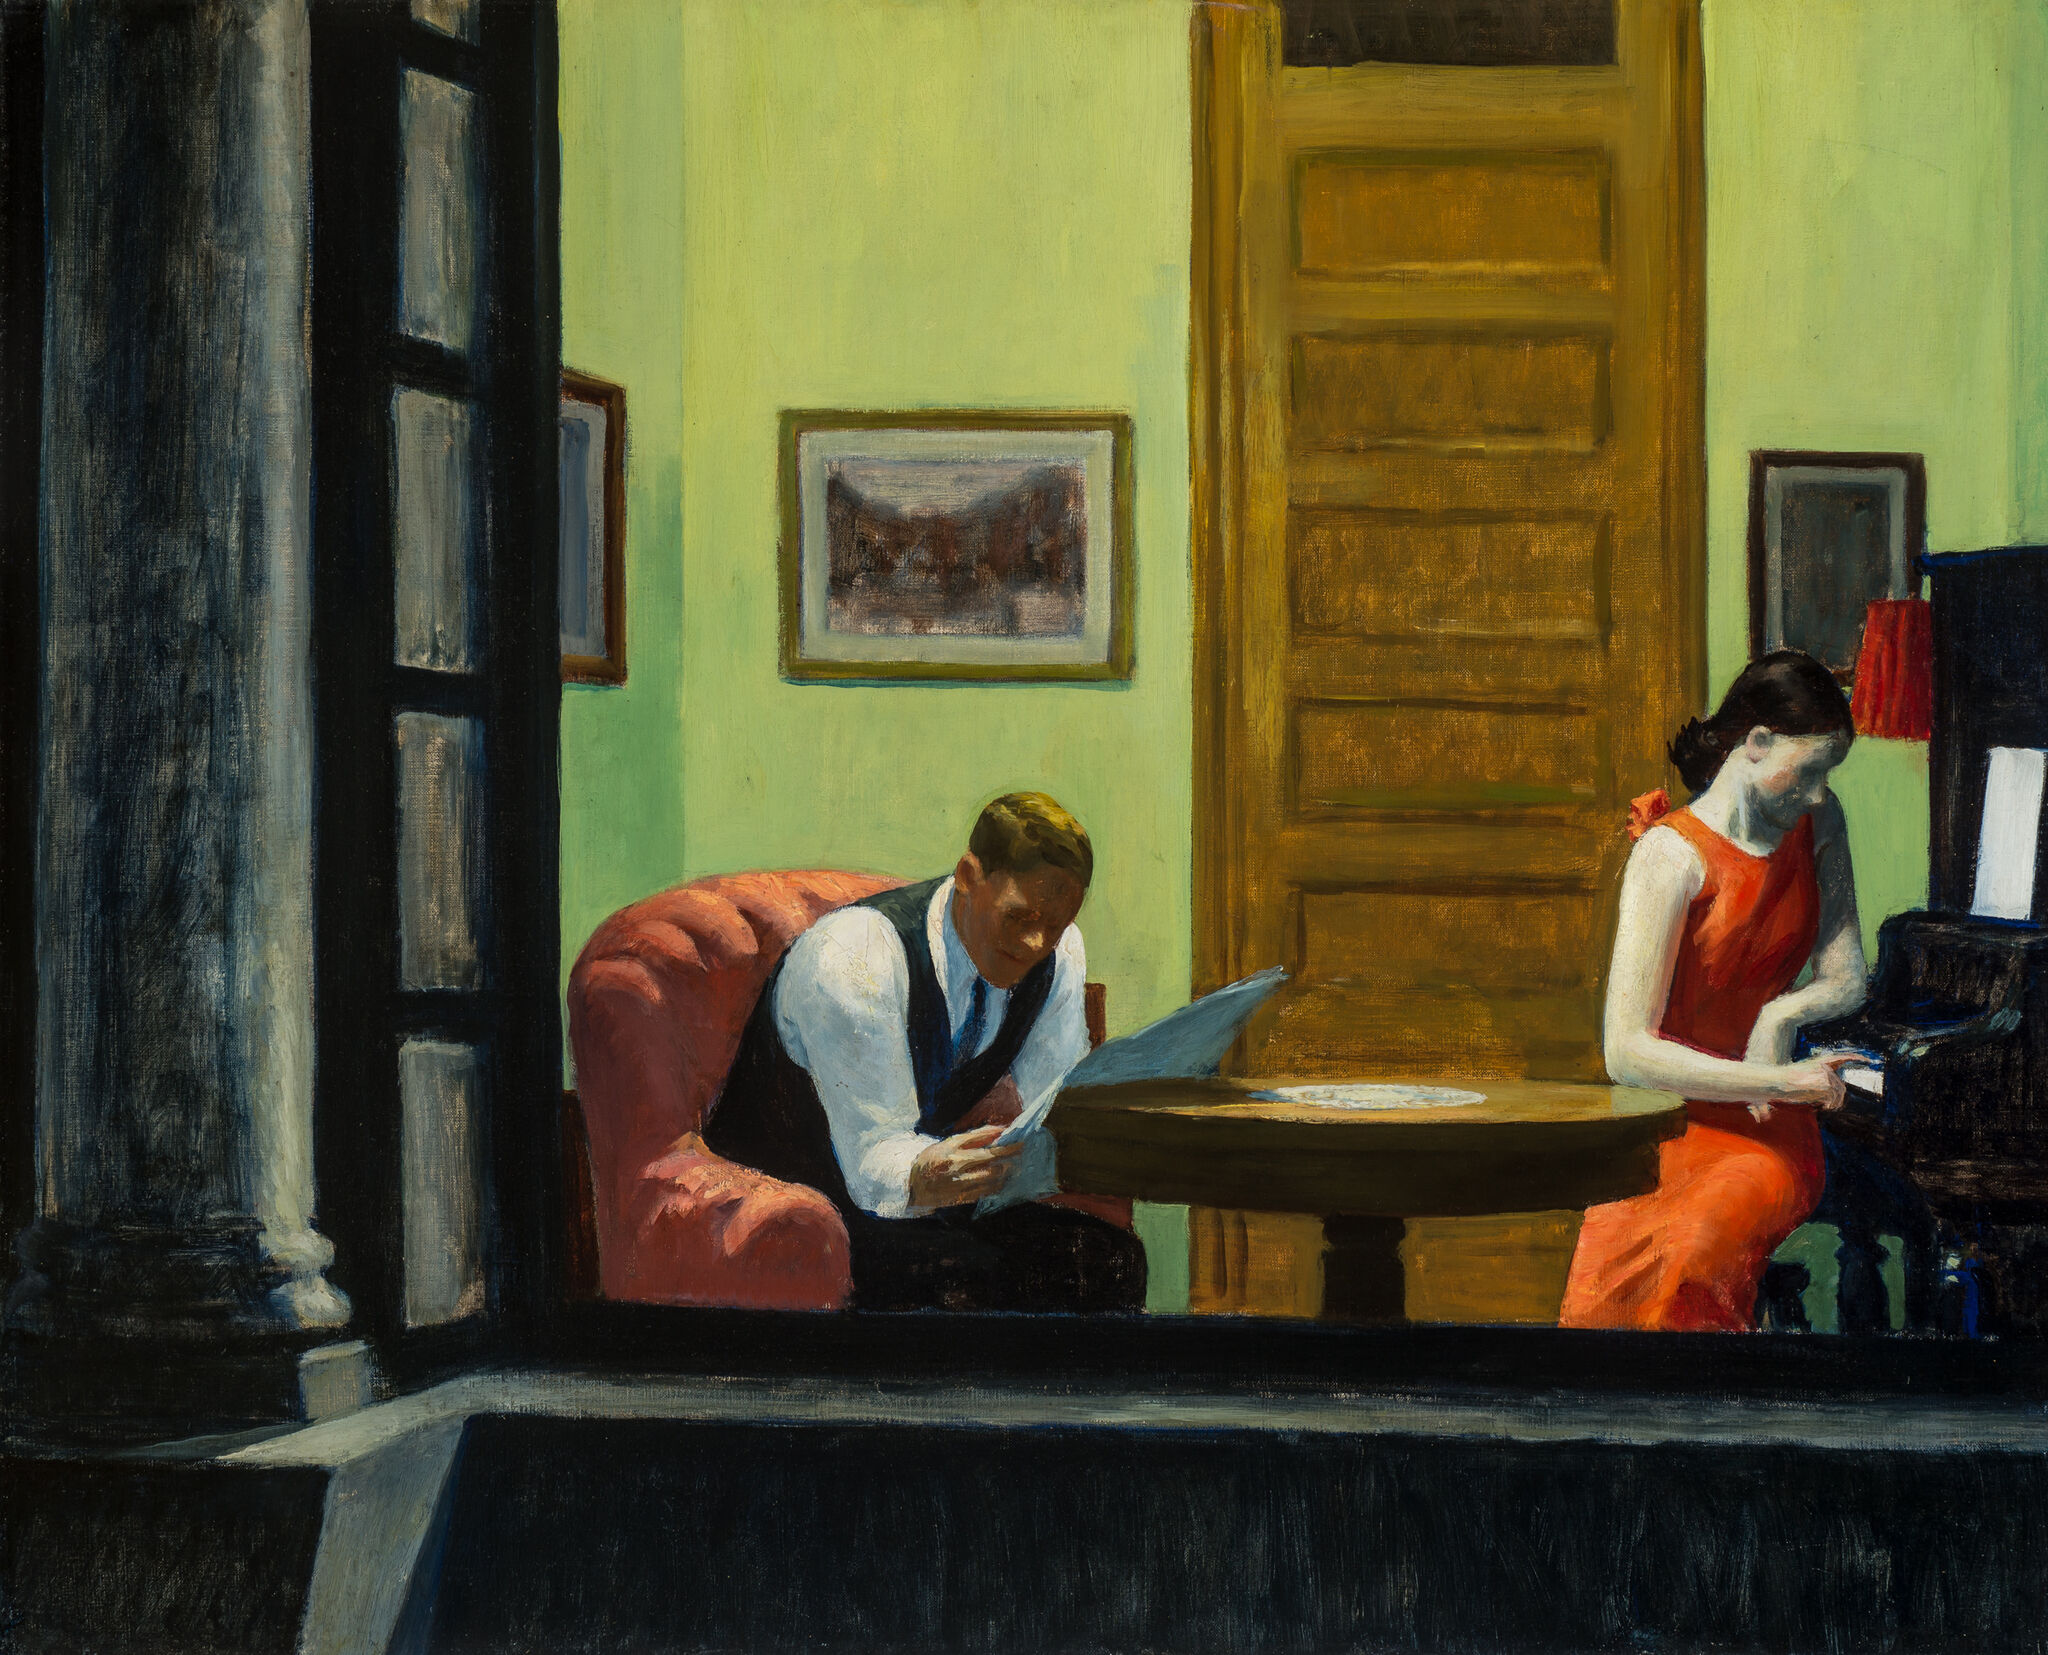 Through a window we see a woman in a red dress at a piano and a man reading a paper.